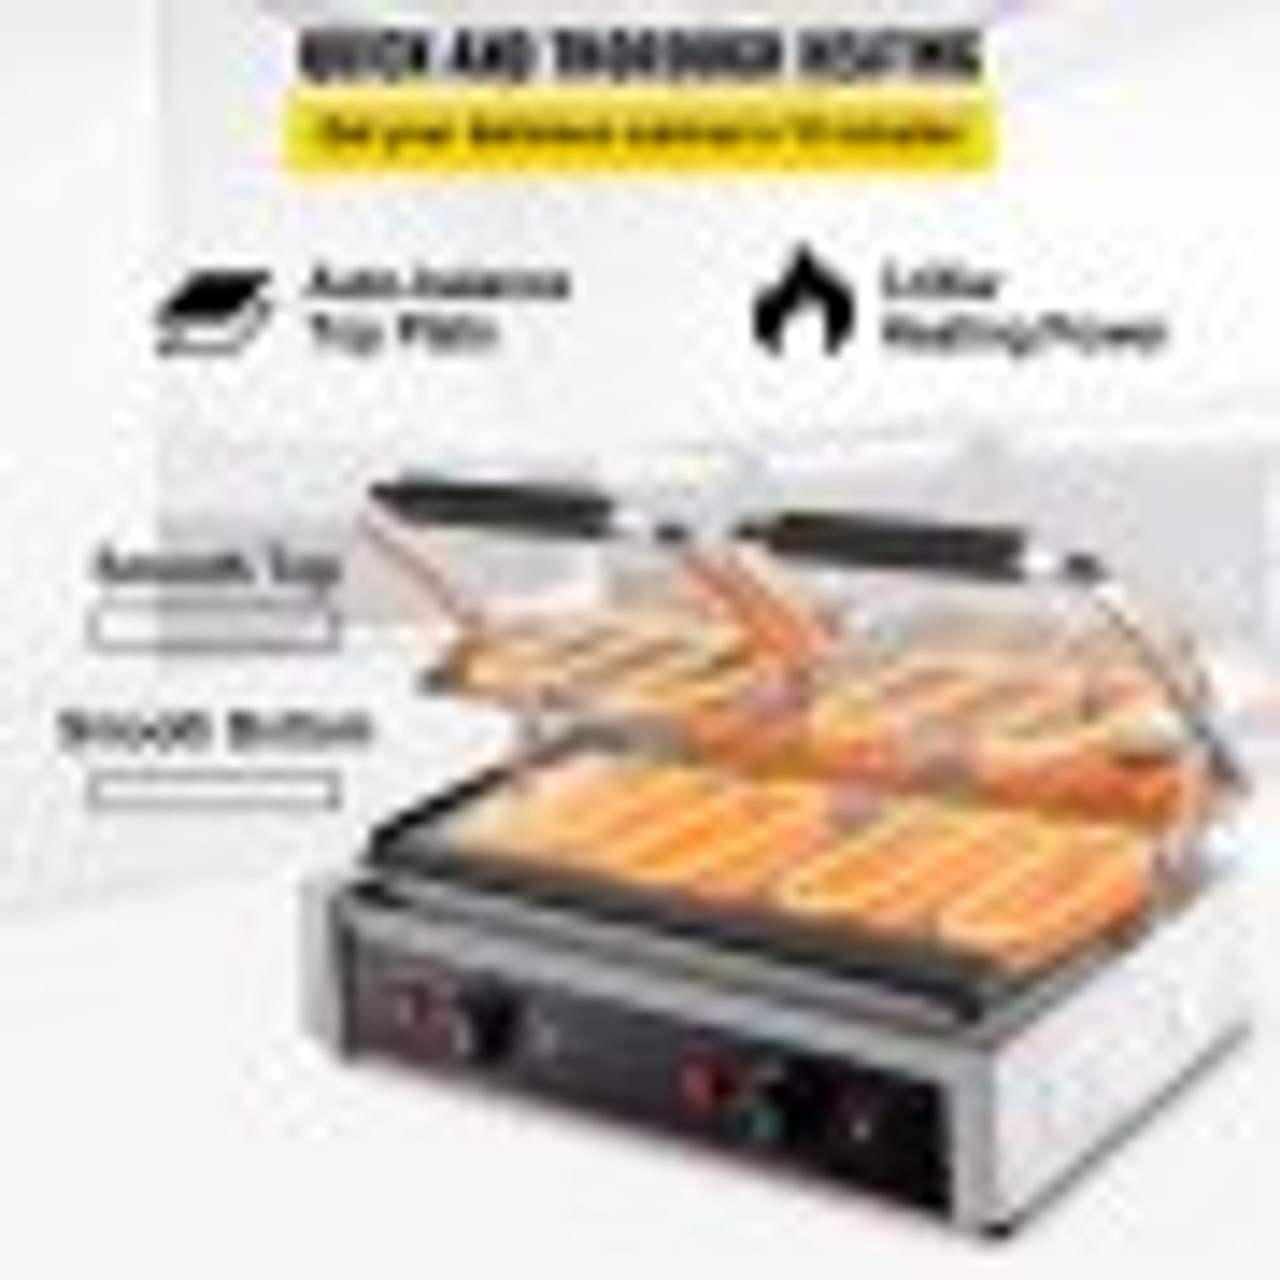 Commercial Sandwich Panini Press Grill, 2X1800W Double Flat Plates Electric Stainless Steel Sandwich Maker, Temperature Control 122øF-572øF Non Stick Surface for Hamburgers Steaks Bacons.